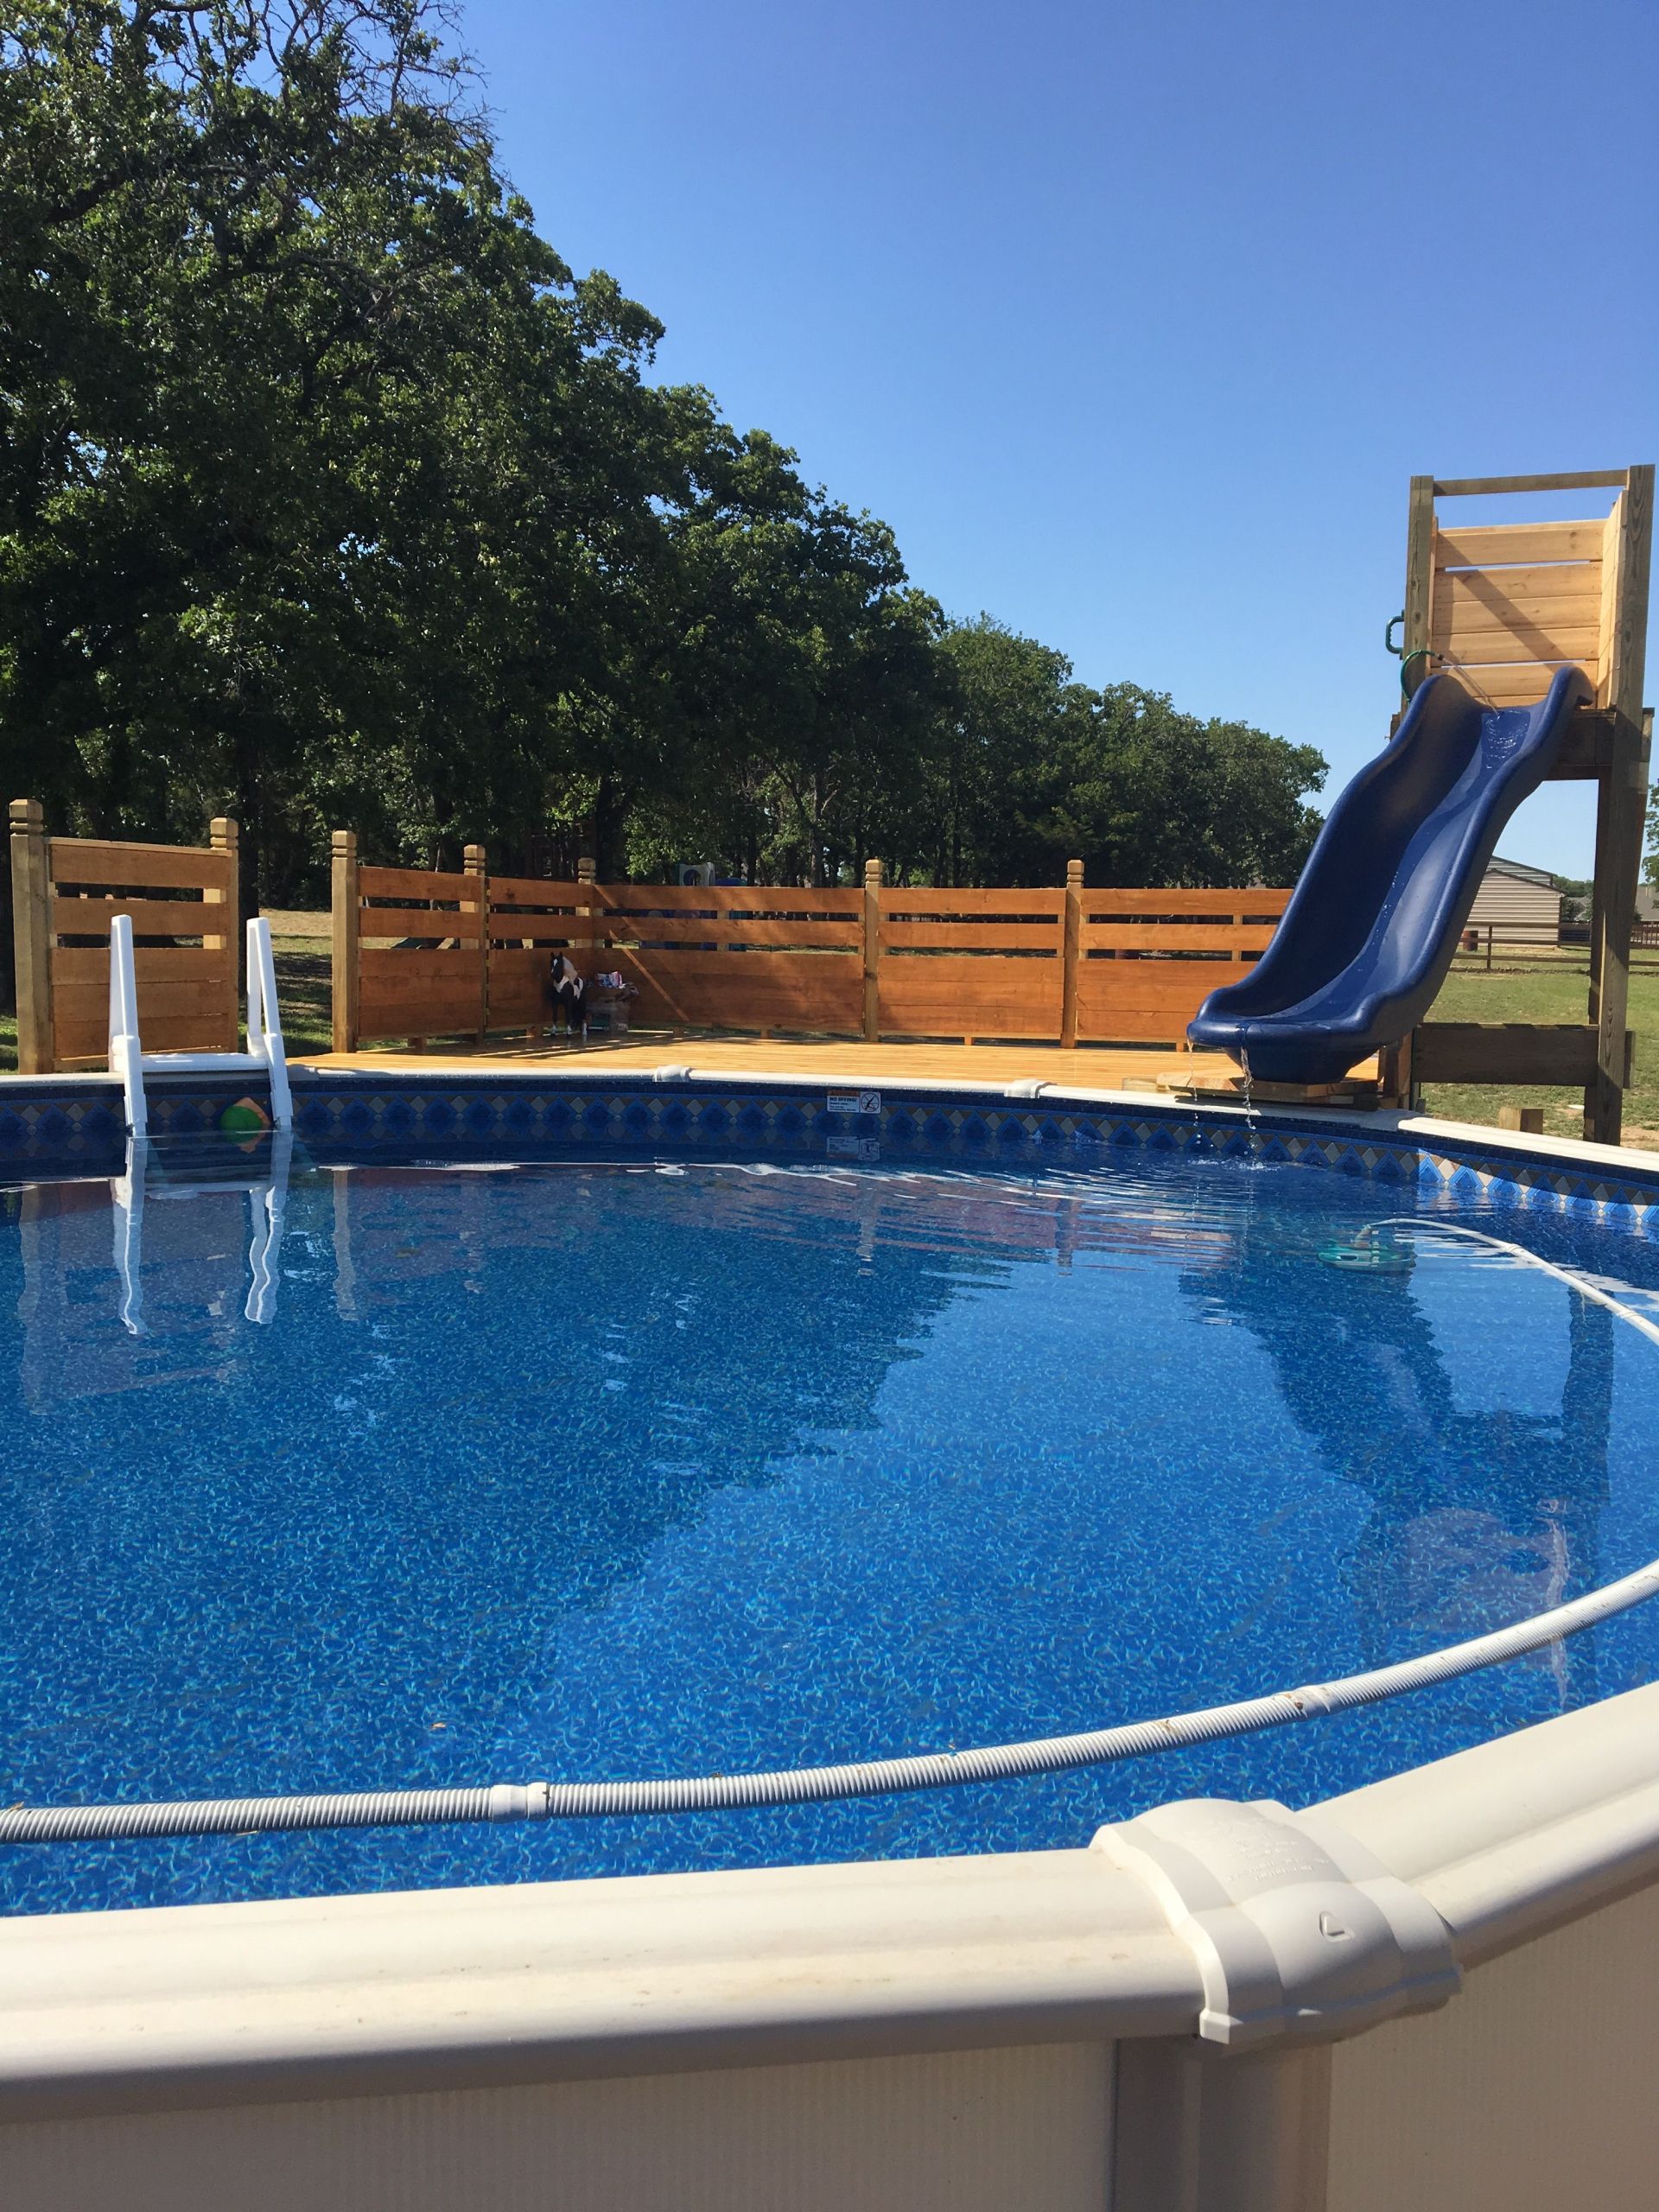 Above Ground Swimming Pool Slides
 Beachy Pool deck with slide